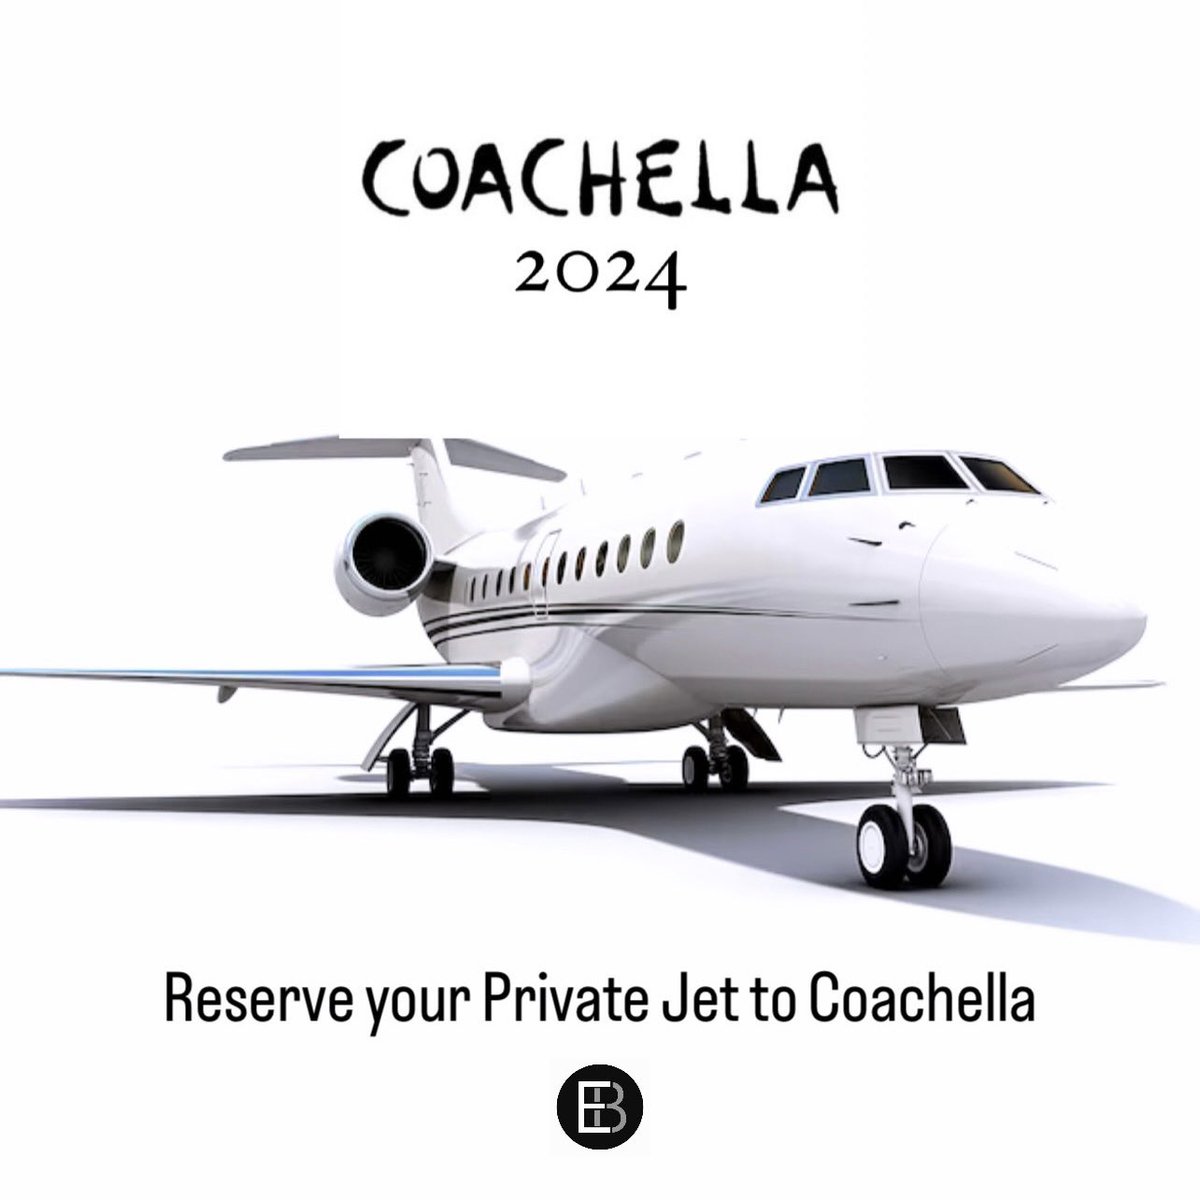 Elevate Your Festival Experience: #FlyPrivate to #Coachella with #EliteBrandsCo 👀

Skip the traffic and arrive in style with our luxurious private jet charter.

#Coachella2024 #PrivateJet #PrivateJets #PrivateJetCharter #PrivateJetCharters #EmptyLeg #EmptyLegs #EliteBrands 

Are